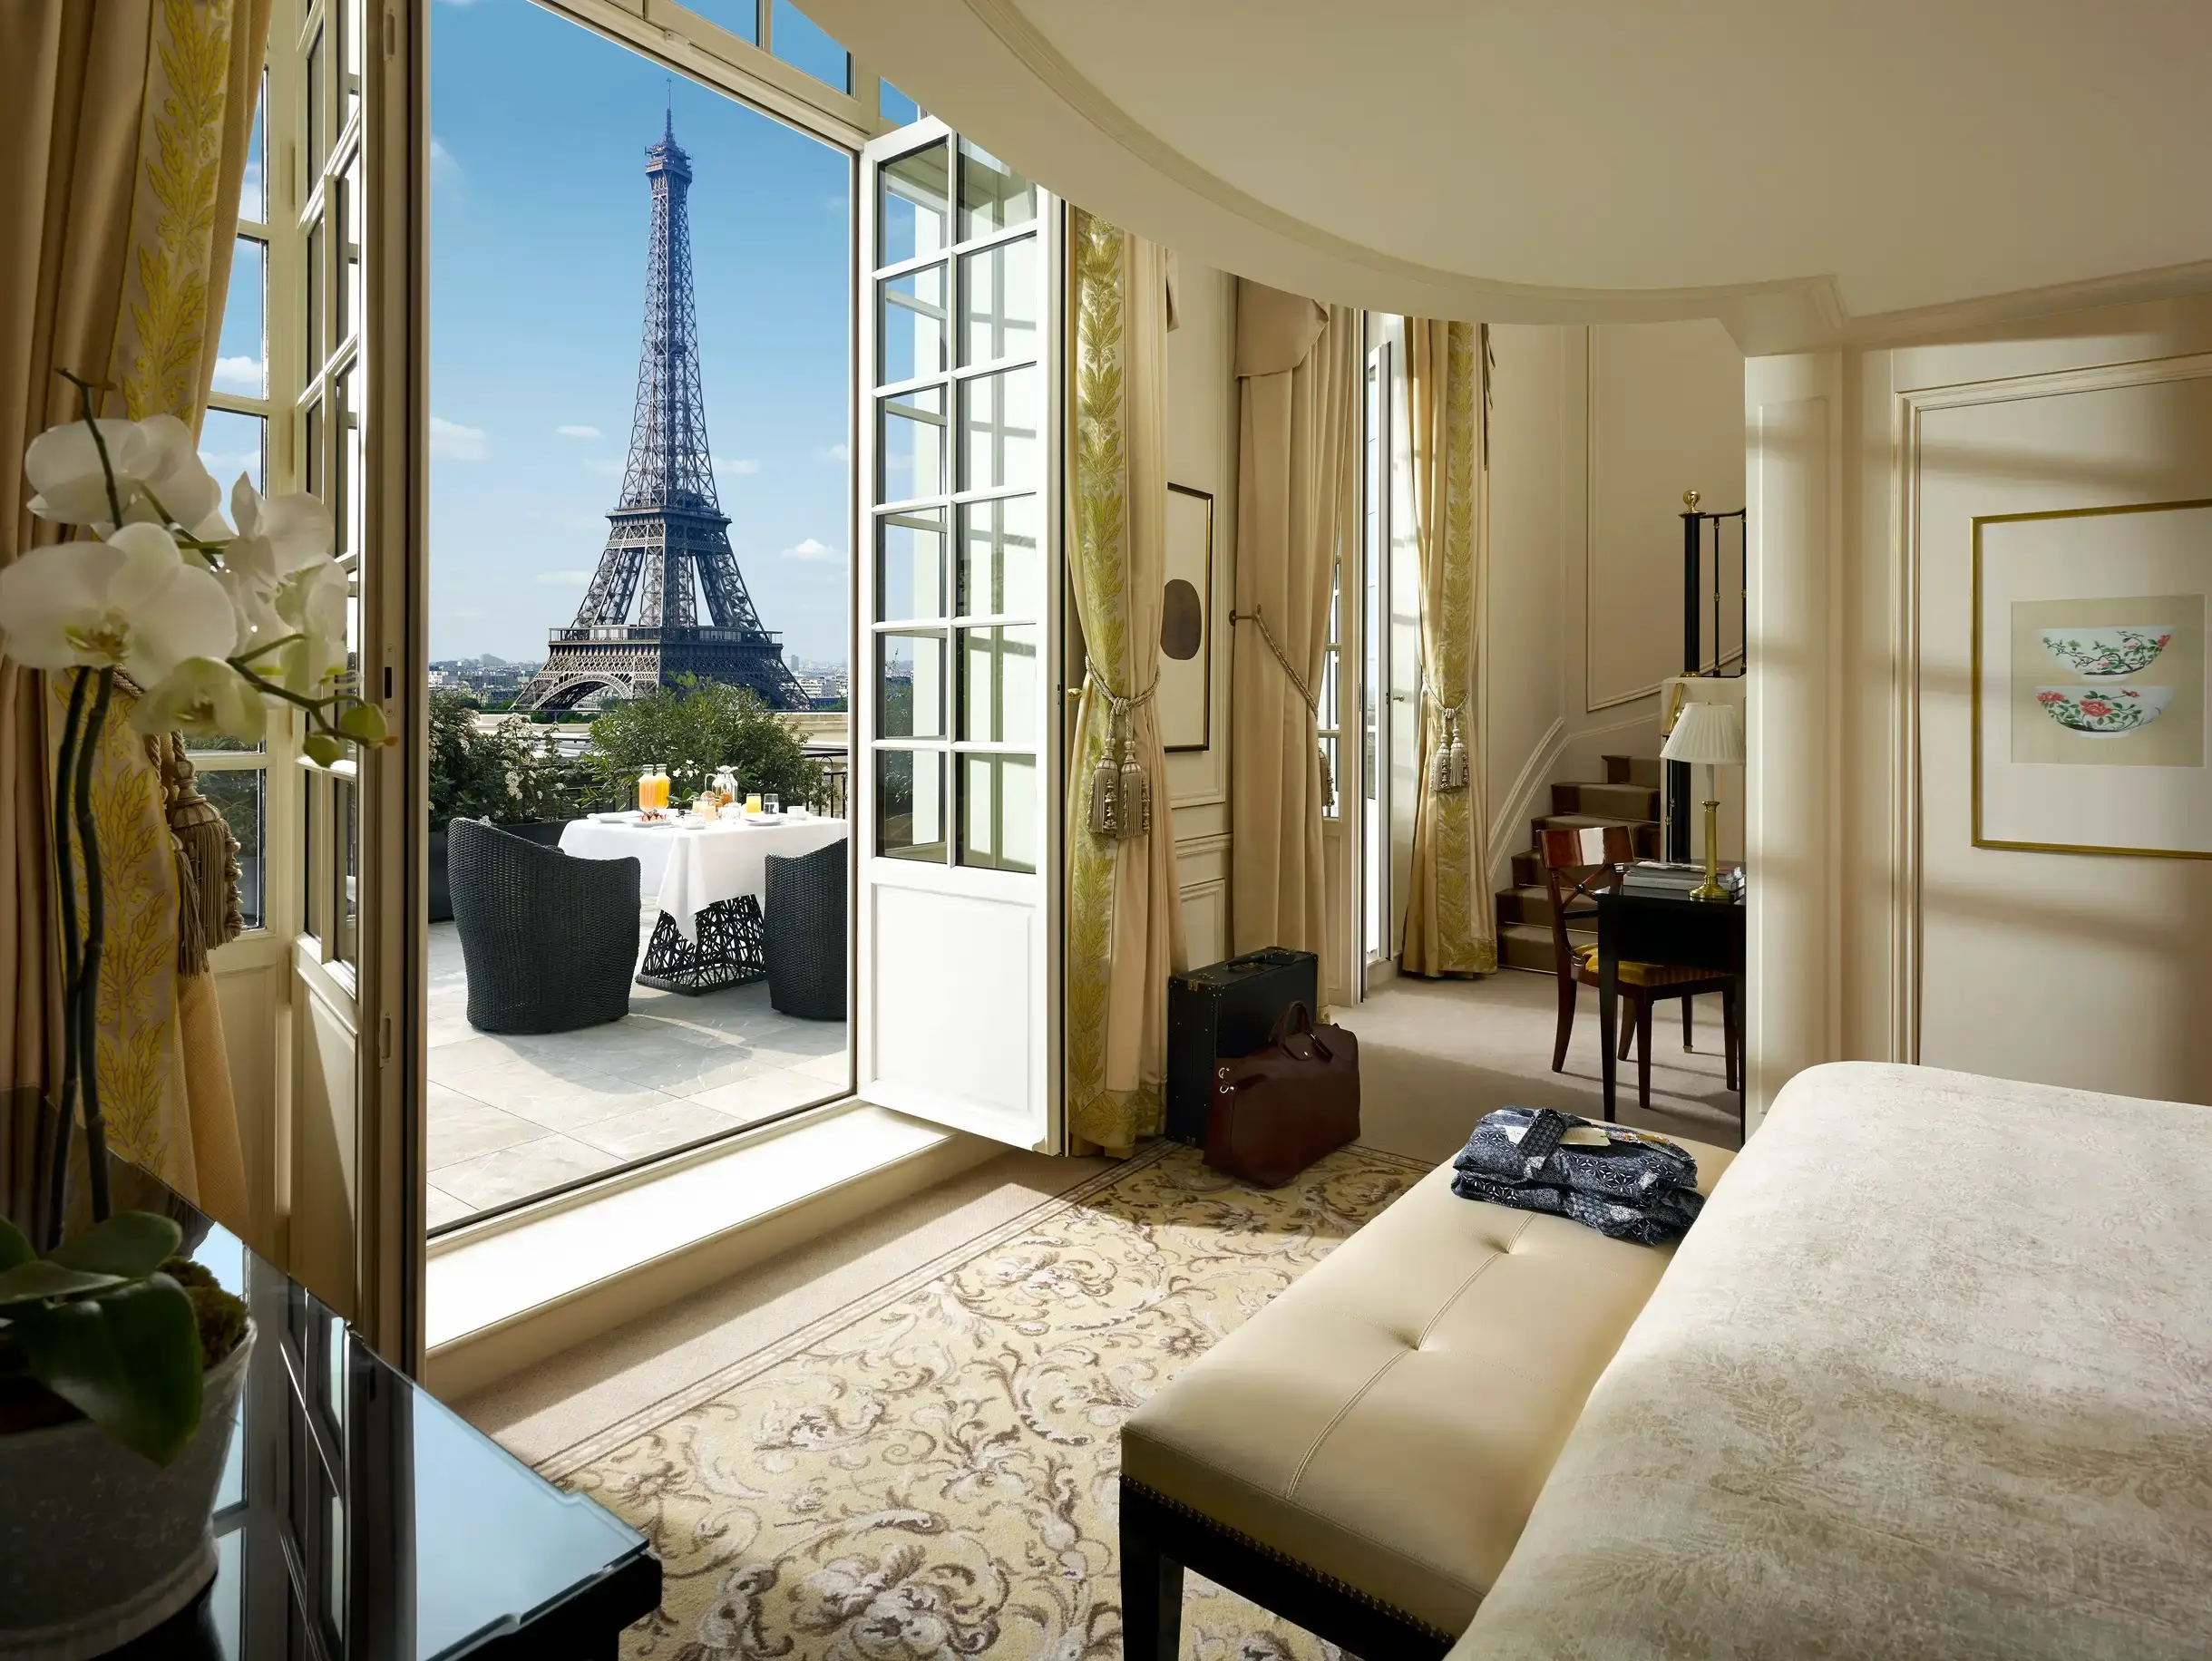 Stunning Duplex Terrace Eiffel View Suite at Shangri-La Paris, an eco-friendly hotel, with opulent furnishings and a balcony offering a breathtaking view of the Eiffel Tower.